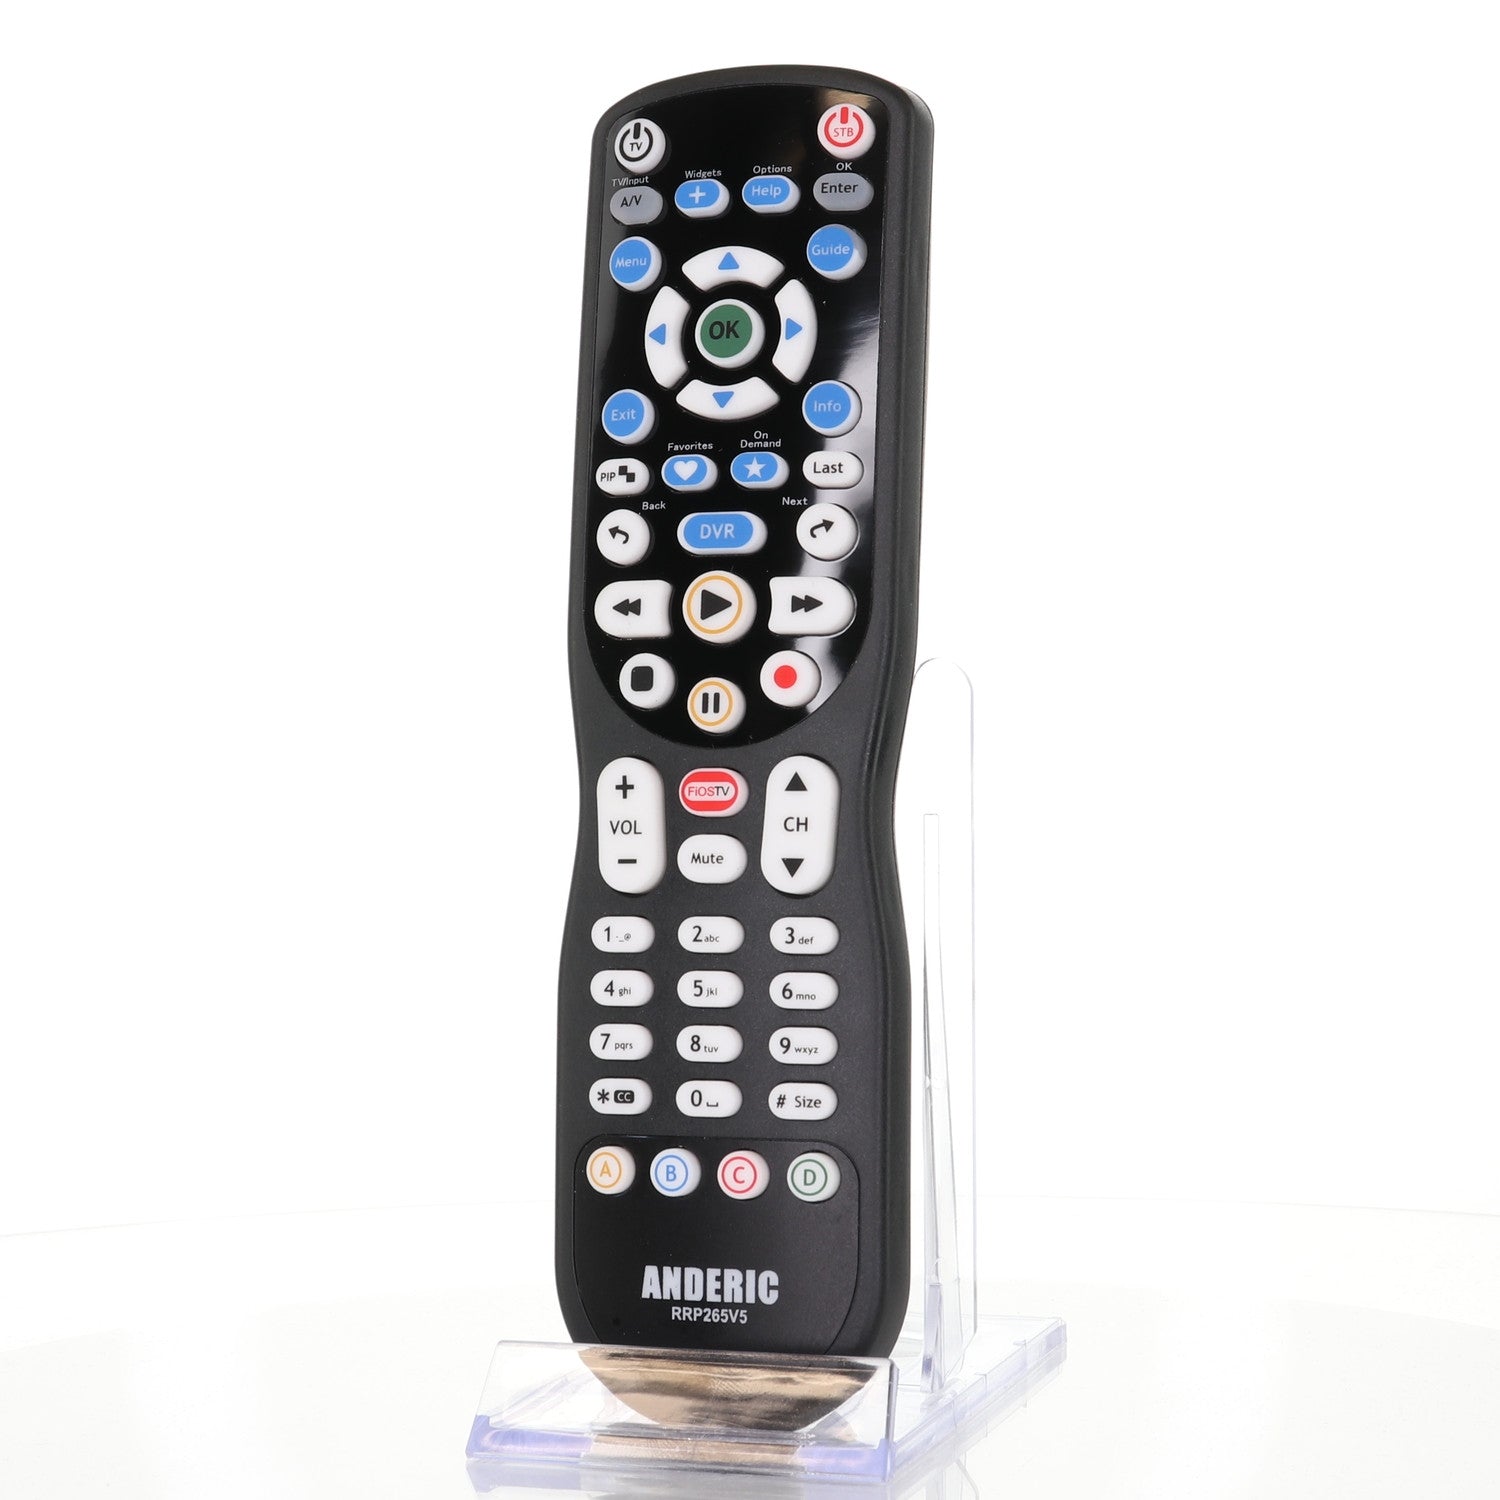 RRP265V5 Remote Control for Verizon® FIOS® Cable Boxes